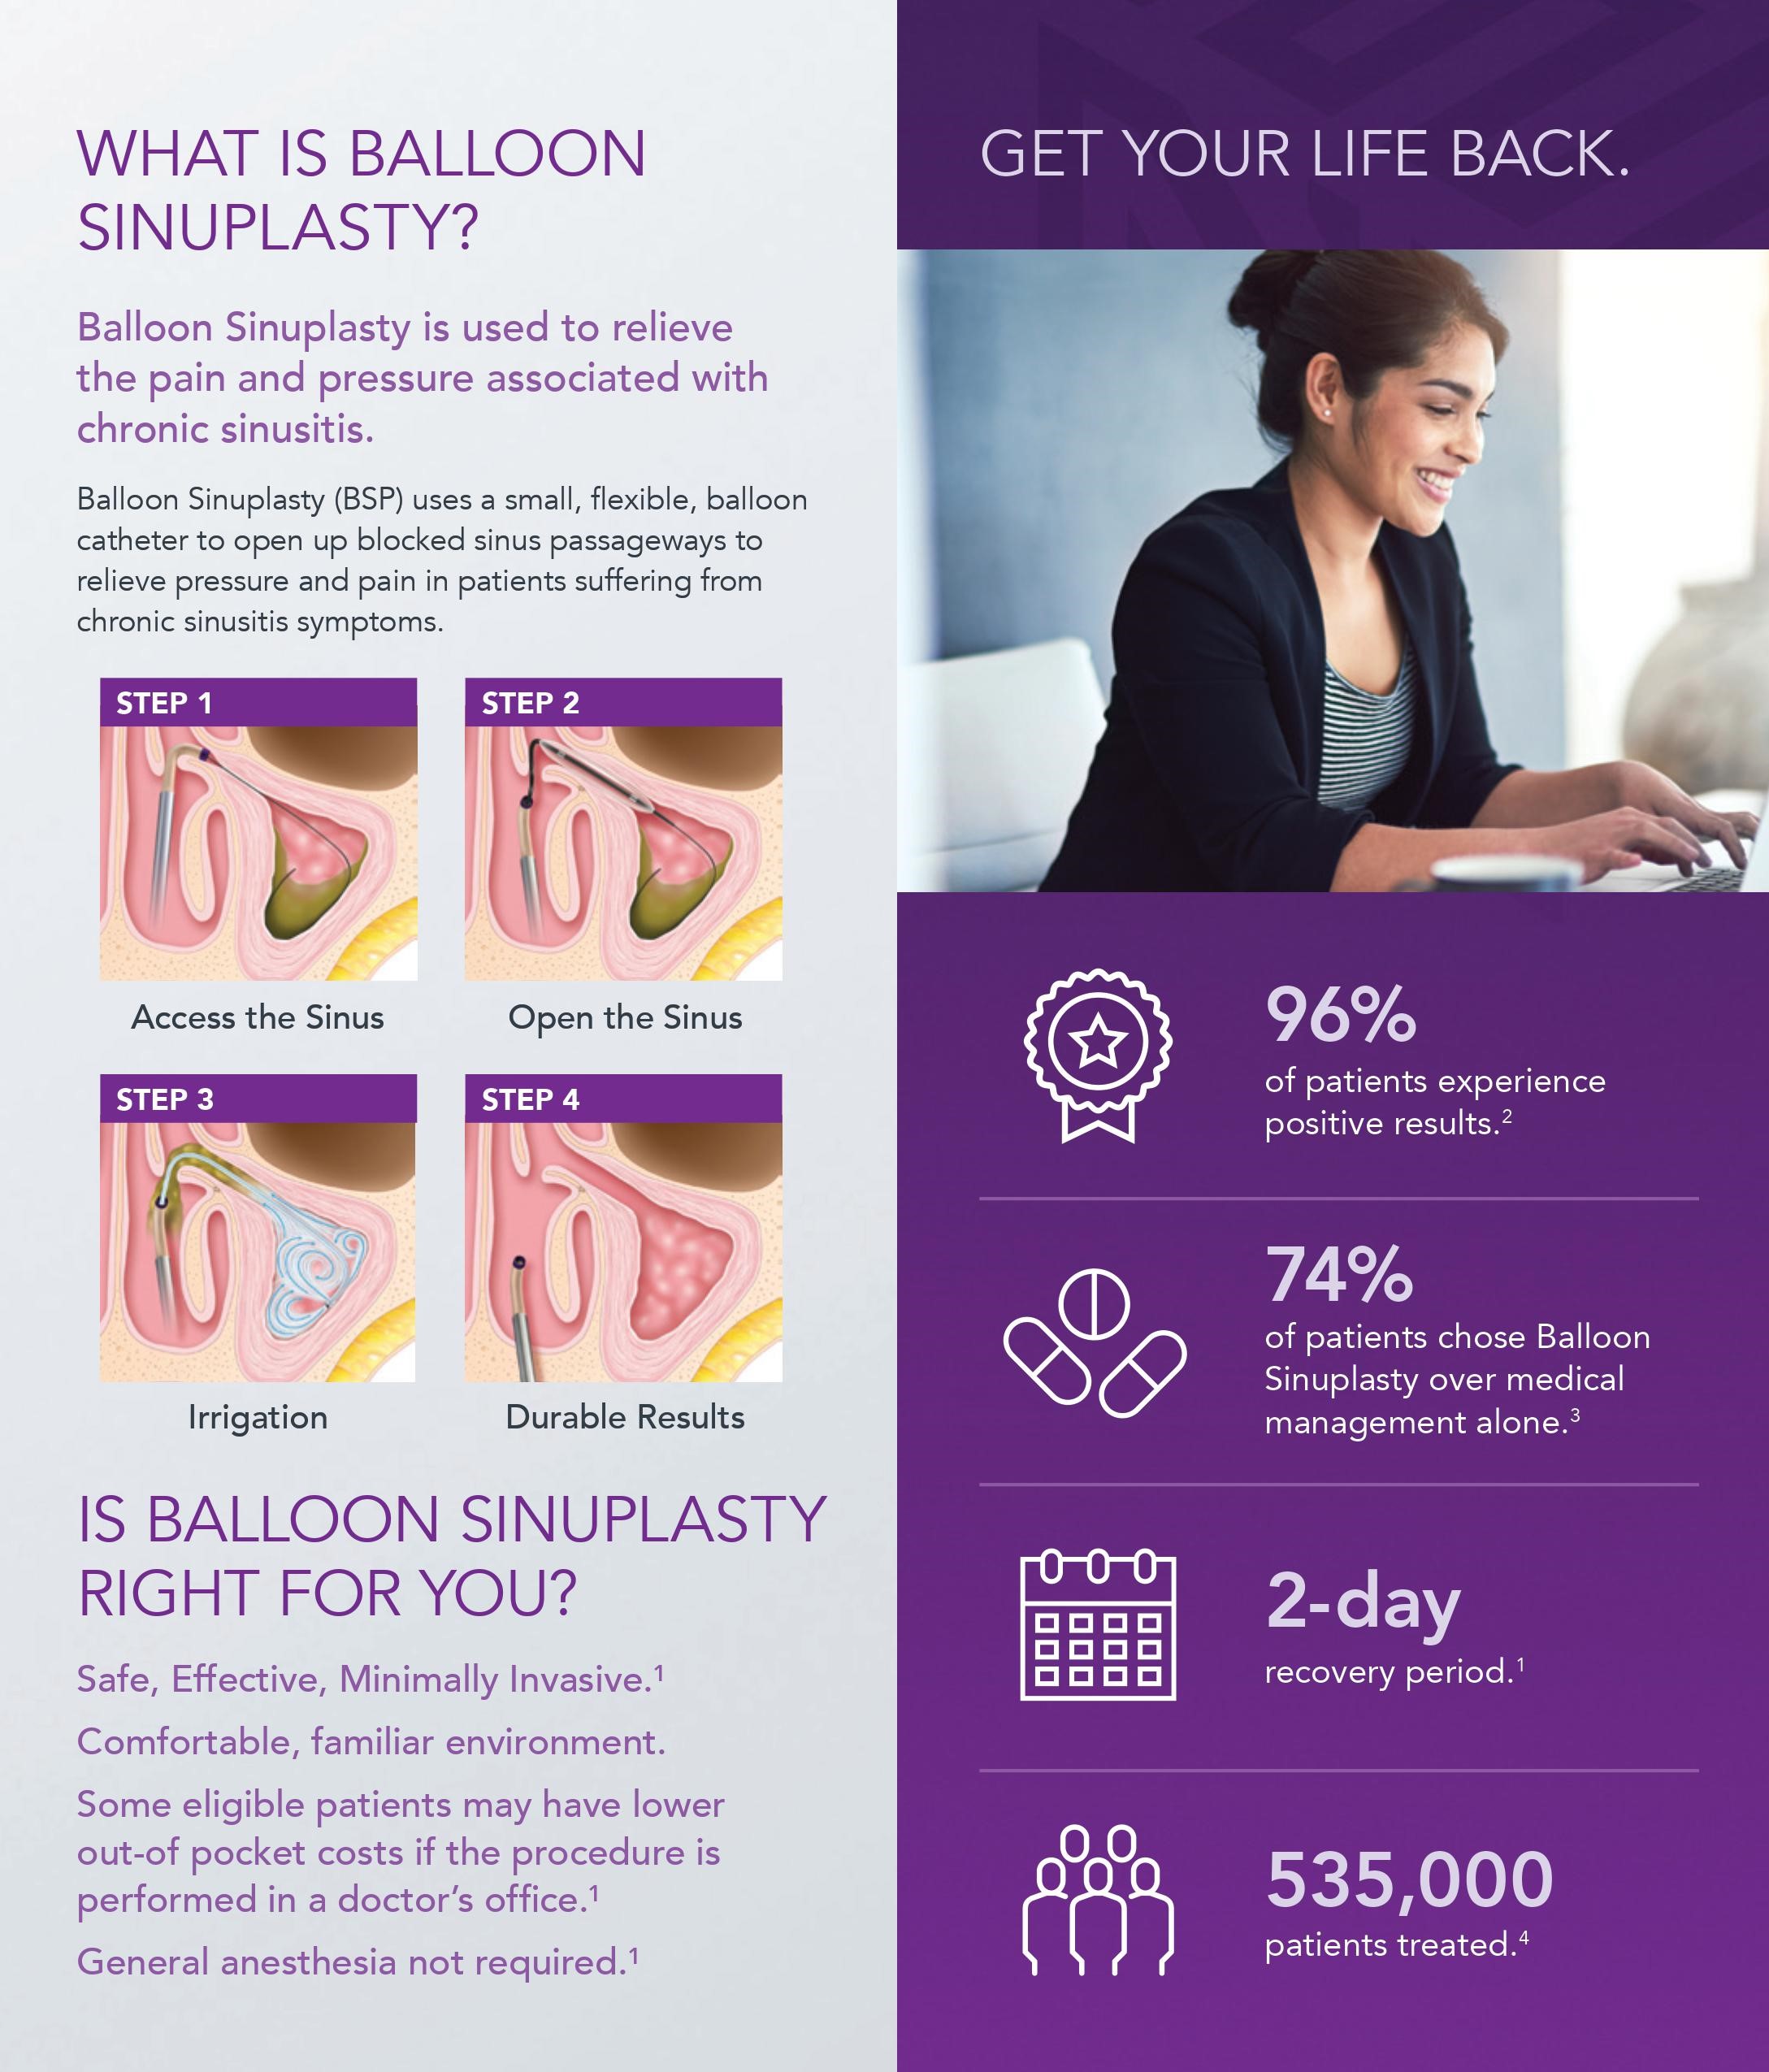 What is Balloon Sinuplasty?